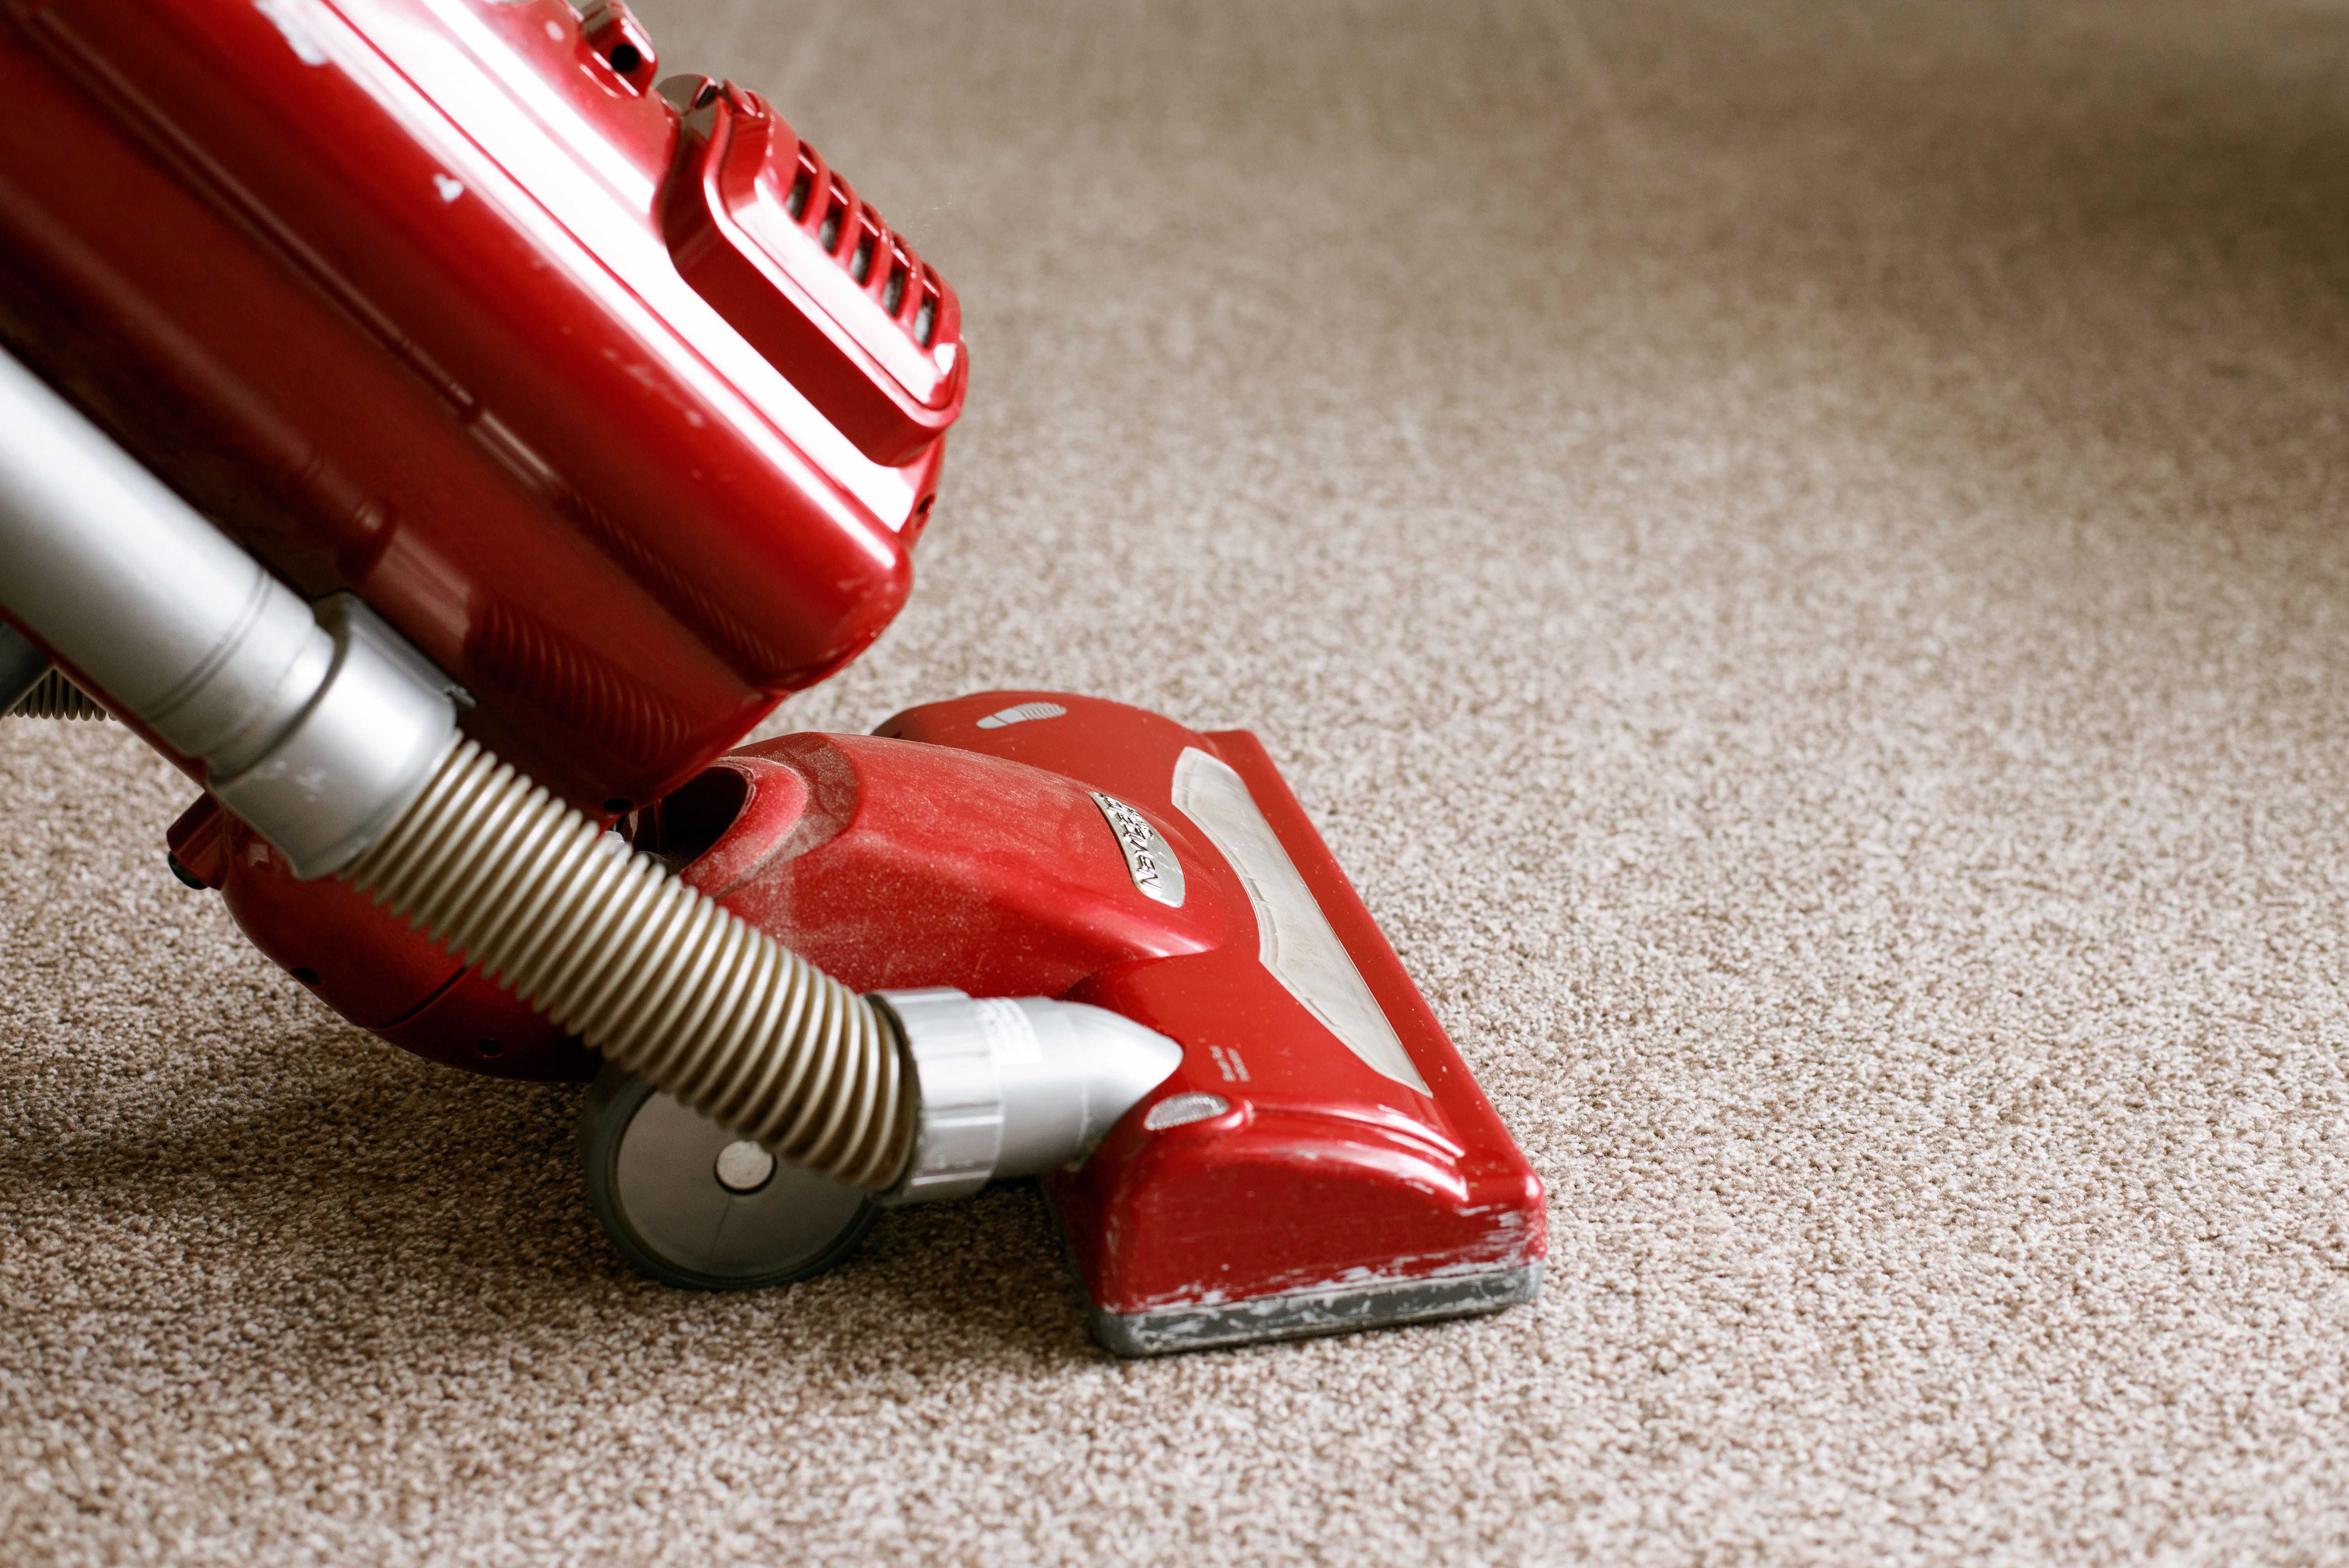 How to Clean a Carpet So It Stays Cleaner for Longer